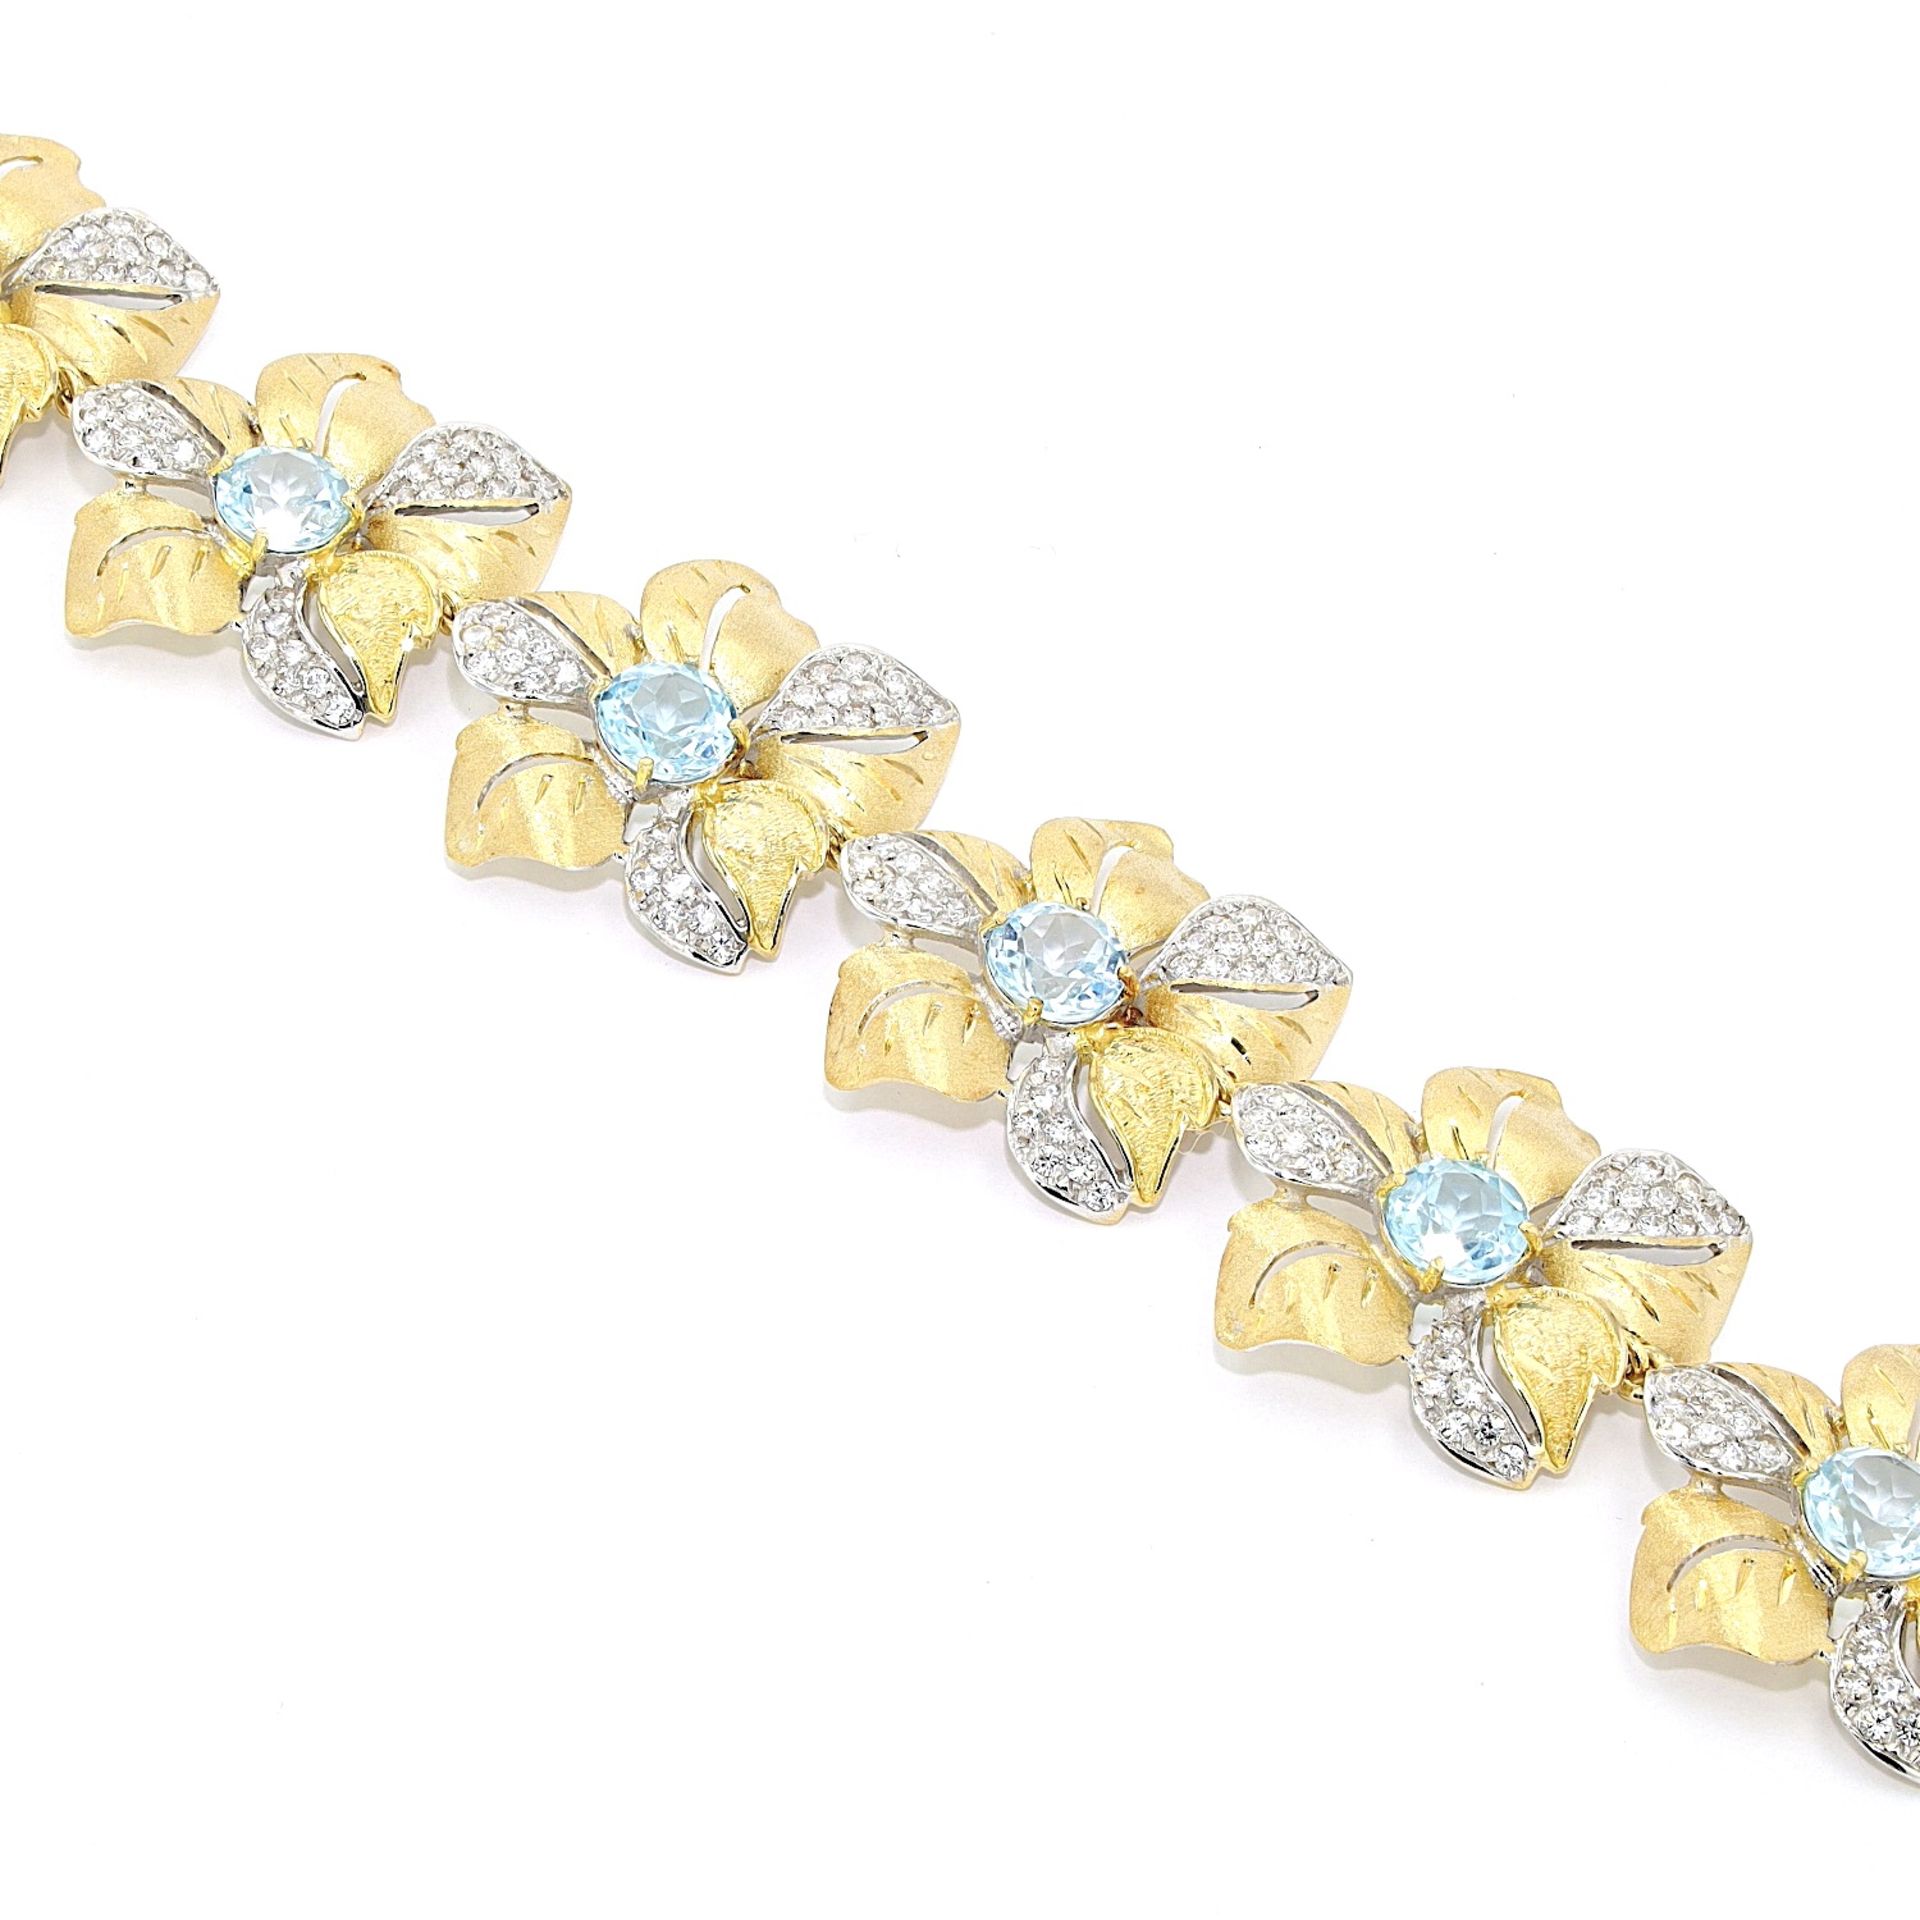 Bracelet, 750 gold with topazes and cubic zirconias - Image 2 of 4